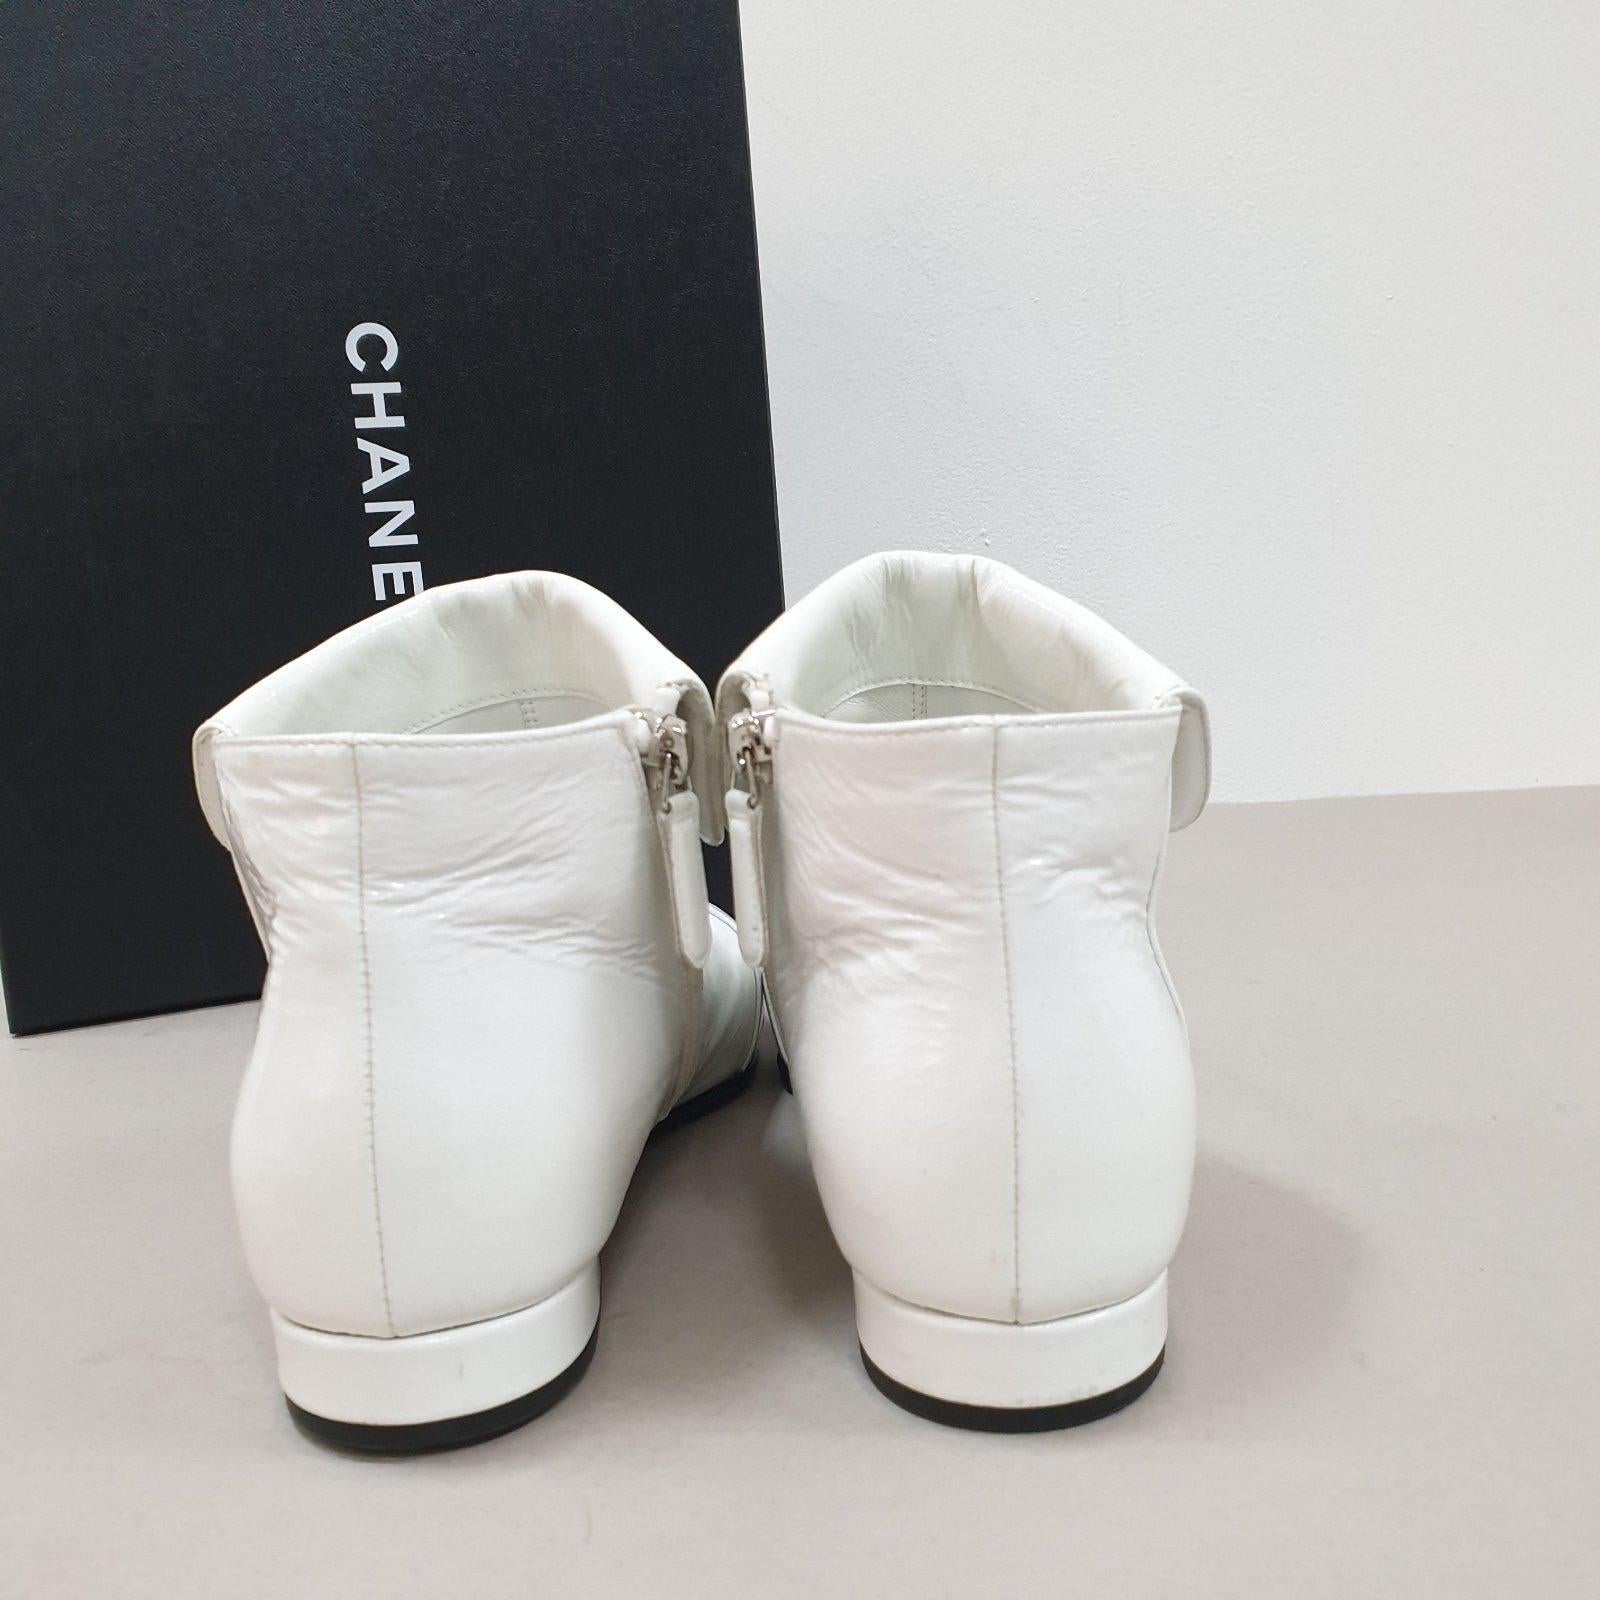 Beautiful Chanel boots.
Sz.37.5 
Bicolour: white and black. in patent leather. 
Zip closure on the side. 
CHANEL lettering on the tongue. little heel 2 cm. 
Good condition.
No box. No dust bag.